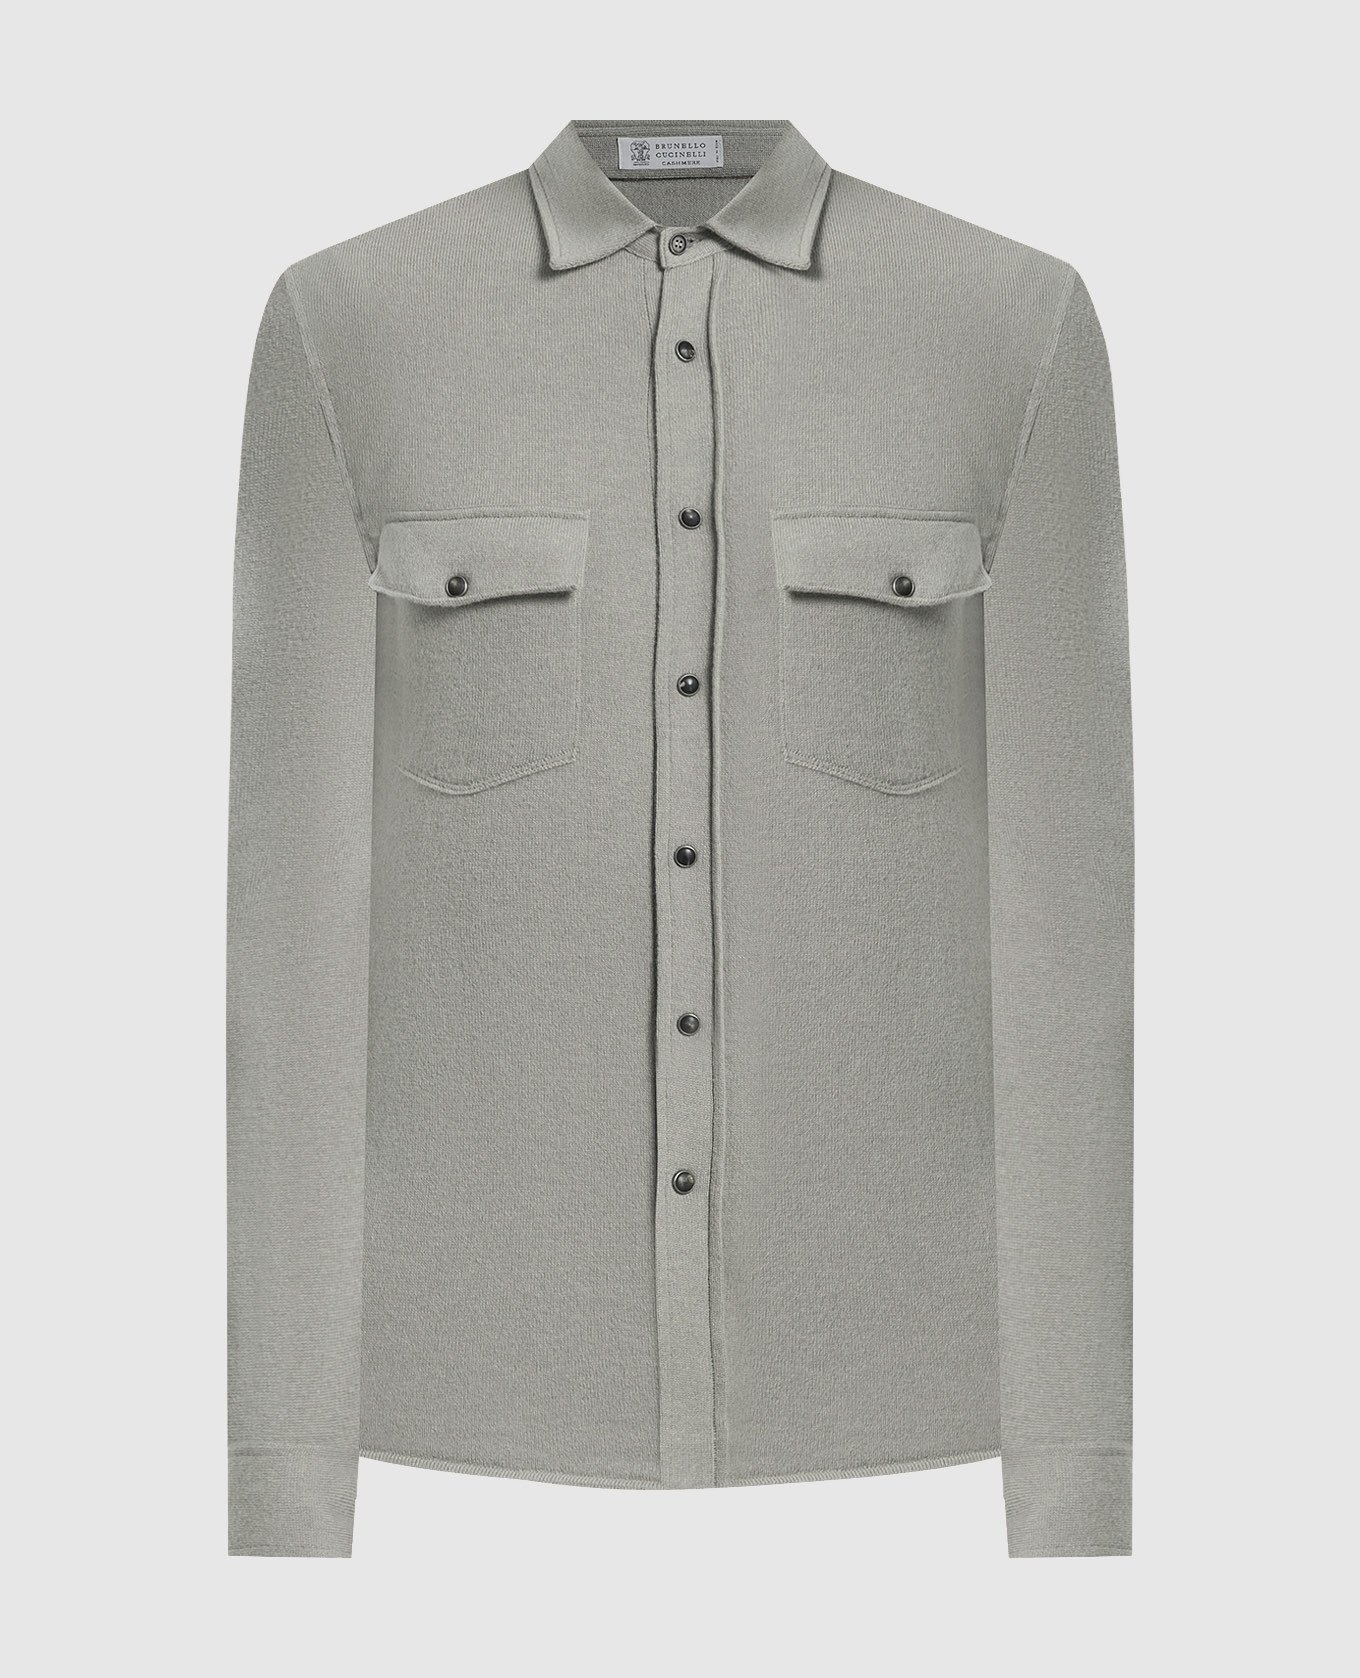 Beige shirt made of wool, cashmere and silk